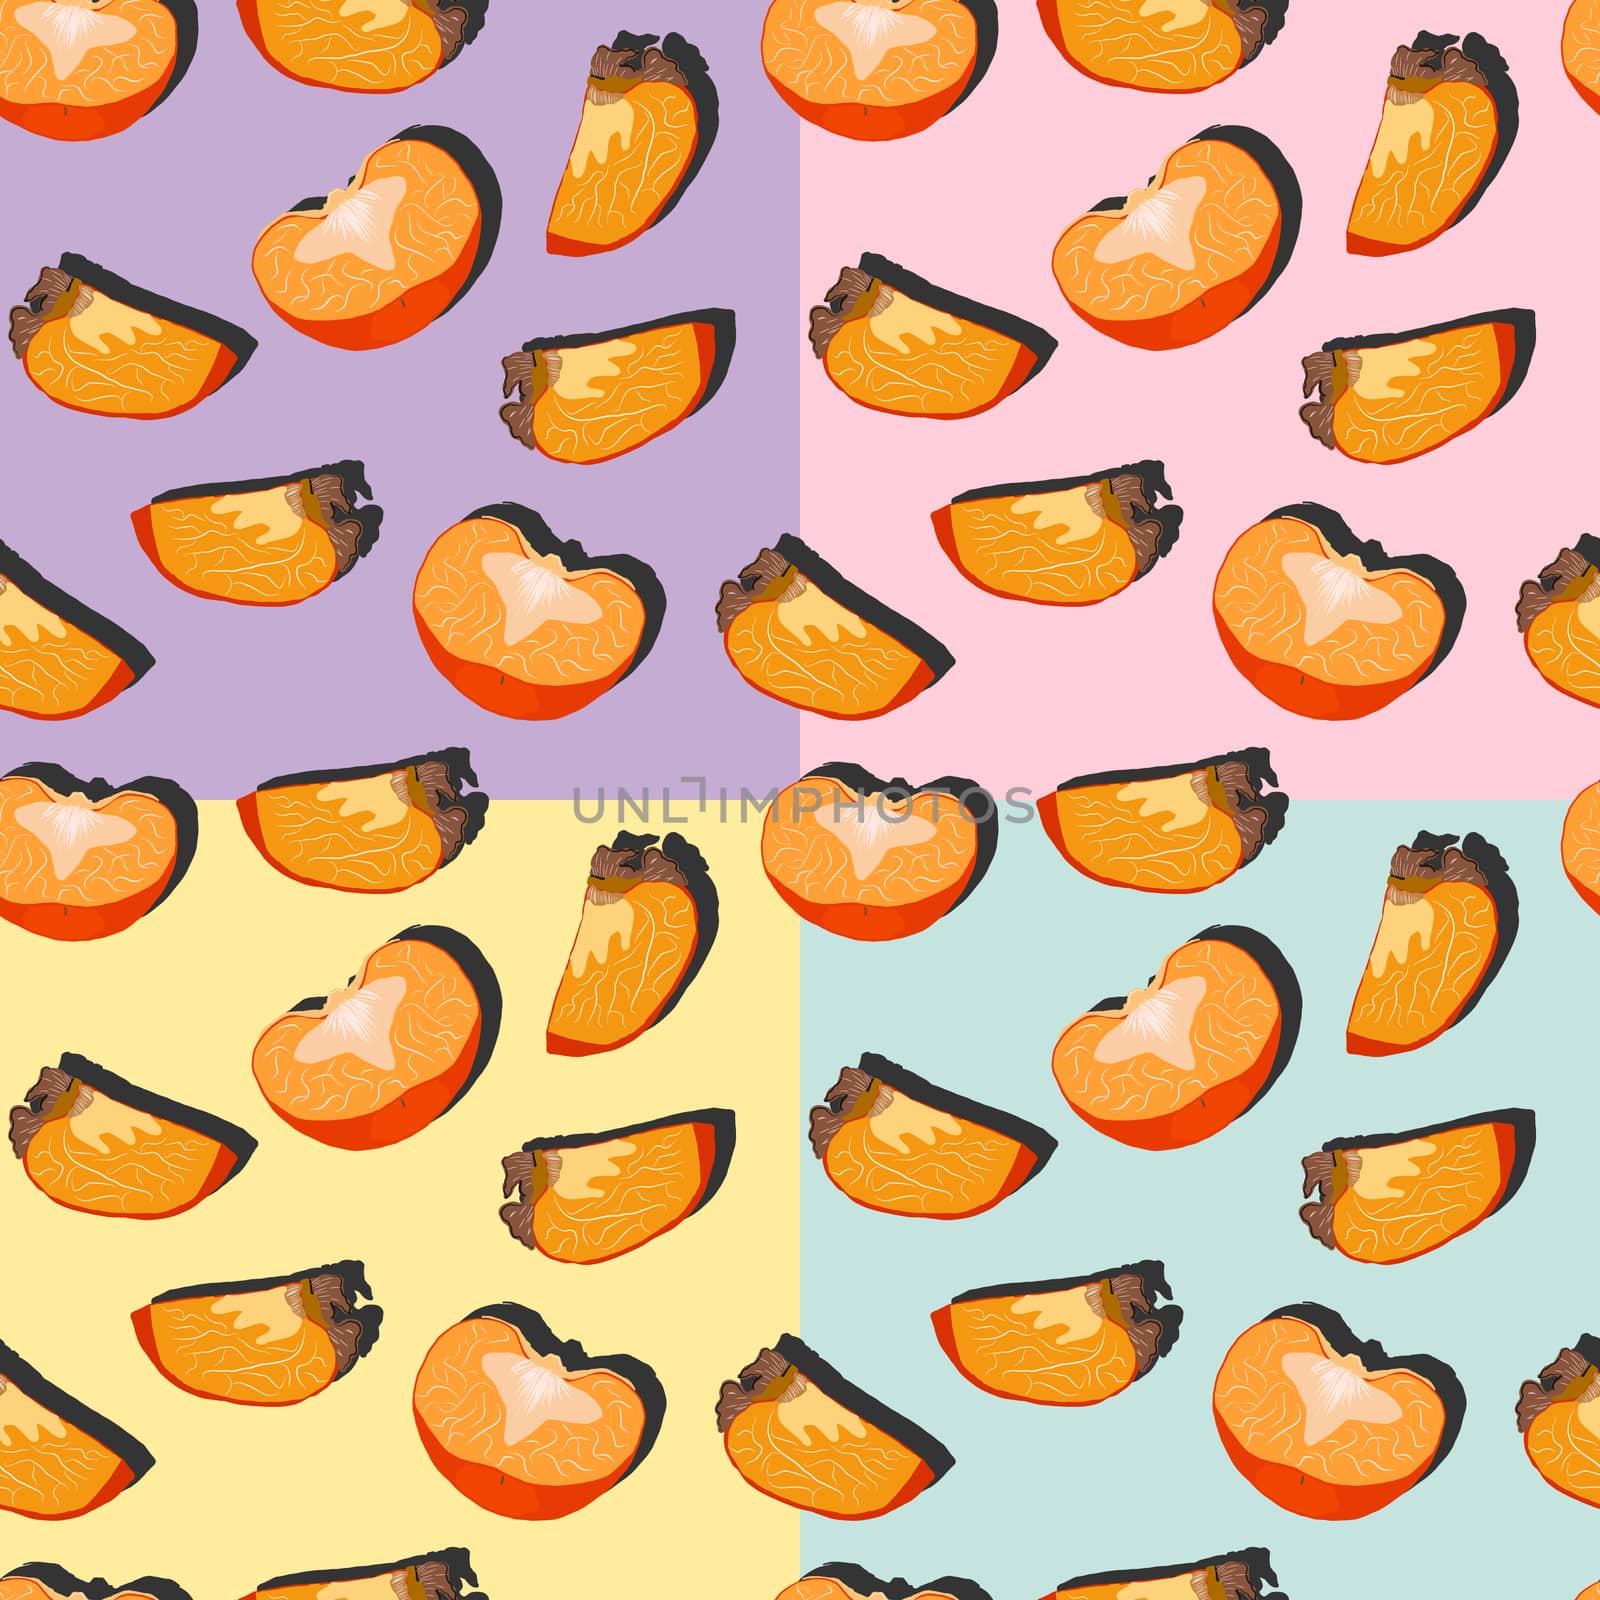 Set of four persimmon slices with shadow pop art seamless patterns on a turquoise, pink, lilac and yellow background. Pattern vector illustration, design for wallpapers, fabrics, textiles, packaging.